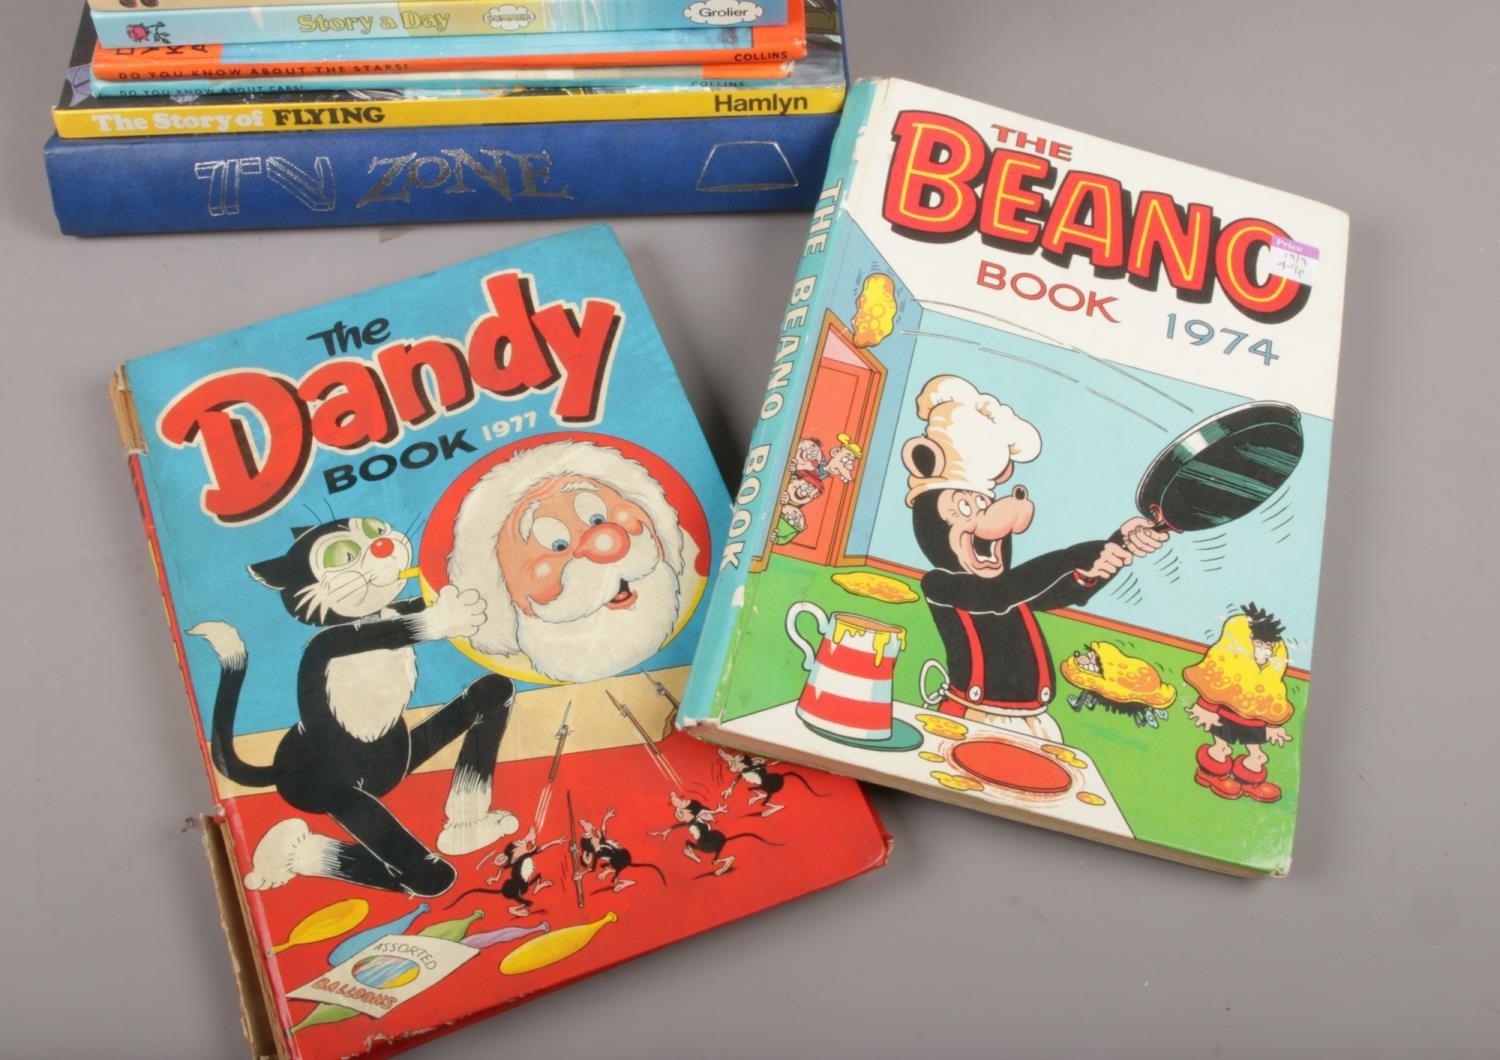 A collection of Annuals, Dandy, Beano, TV21 examples 1968, 1977 1986 editions - Image 2 of 3